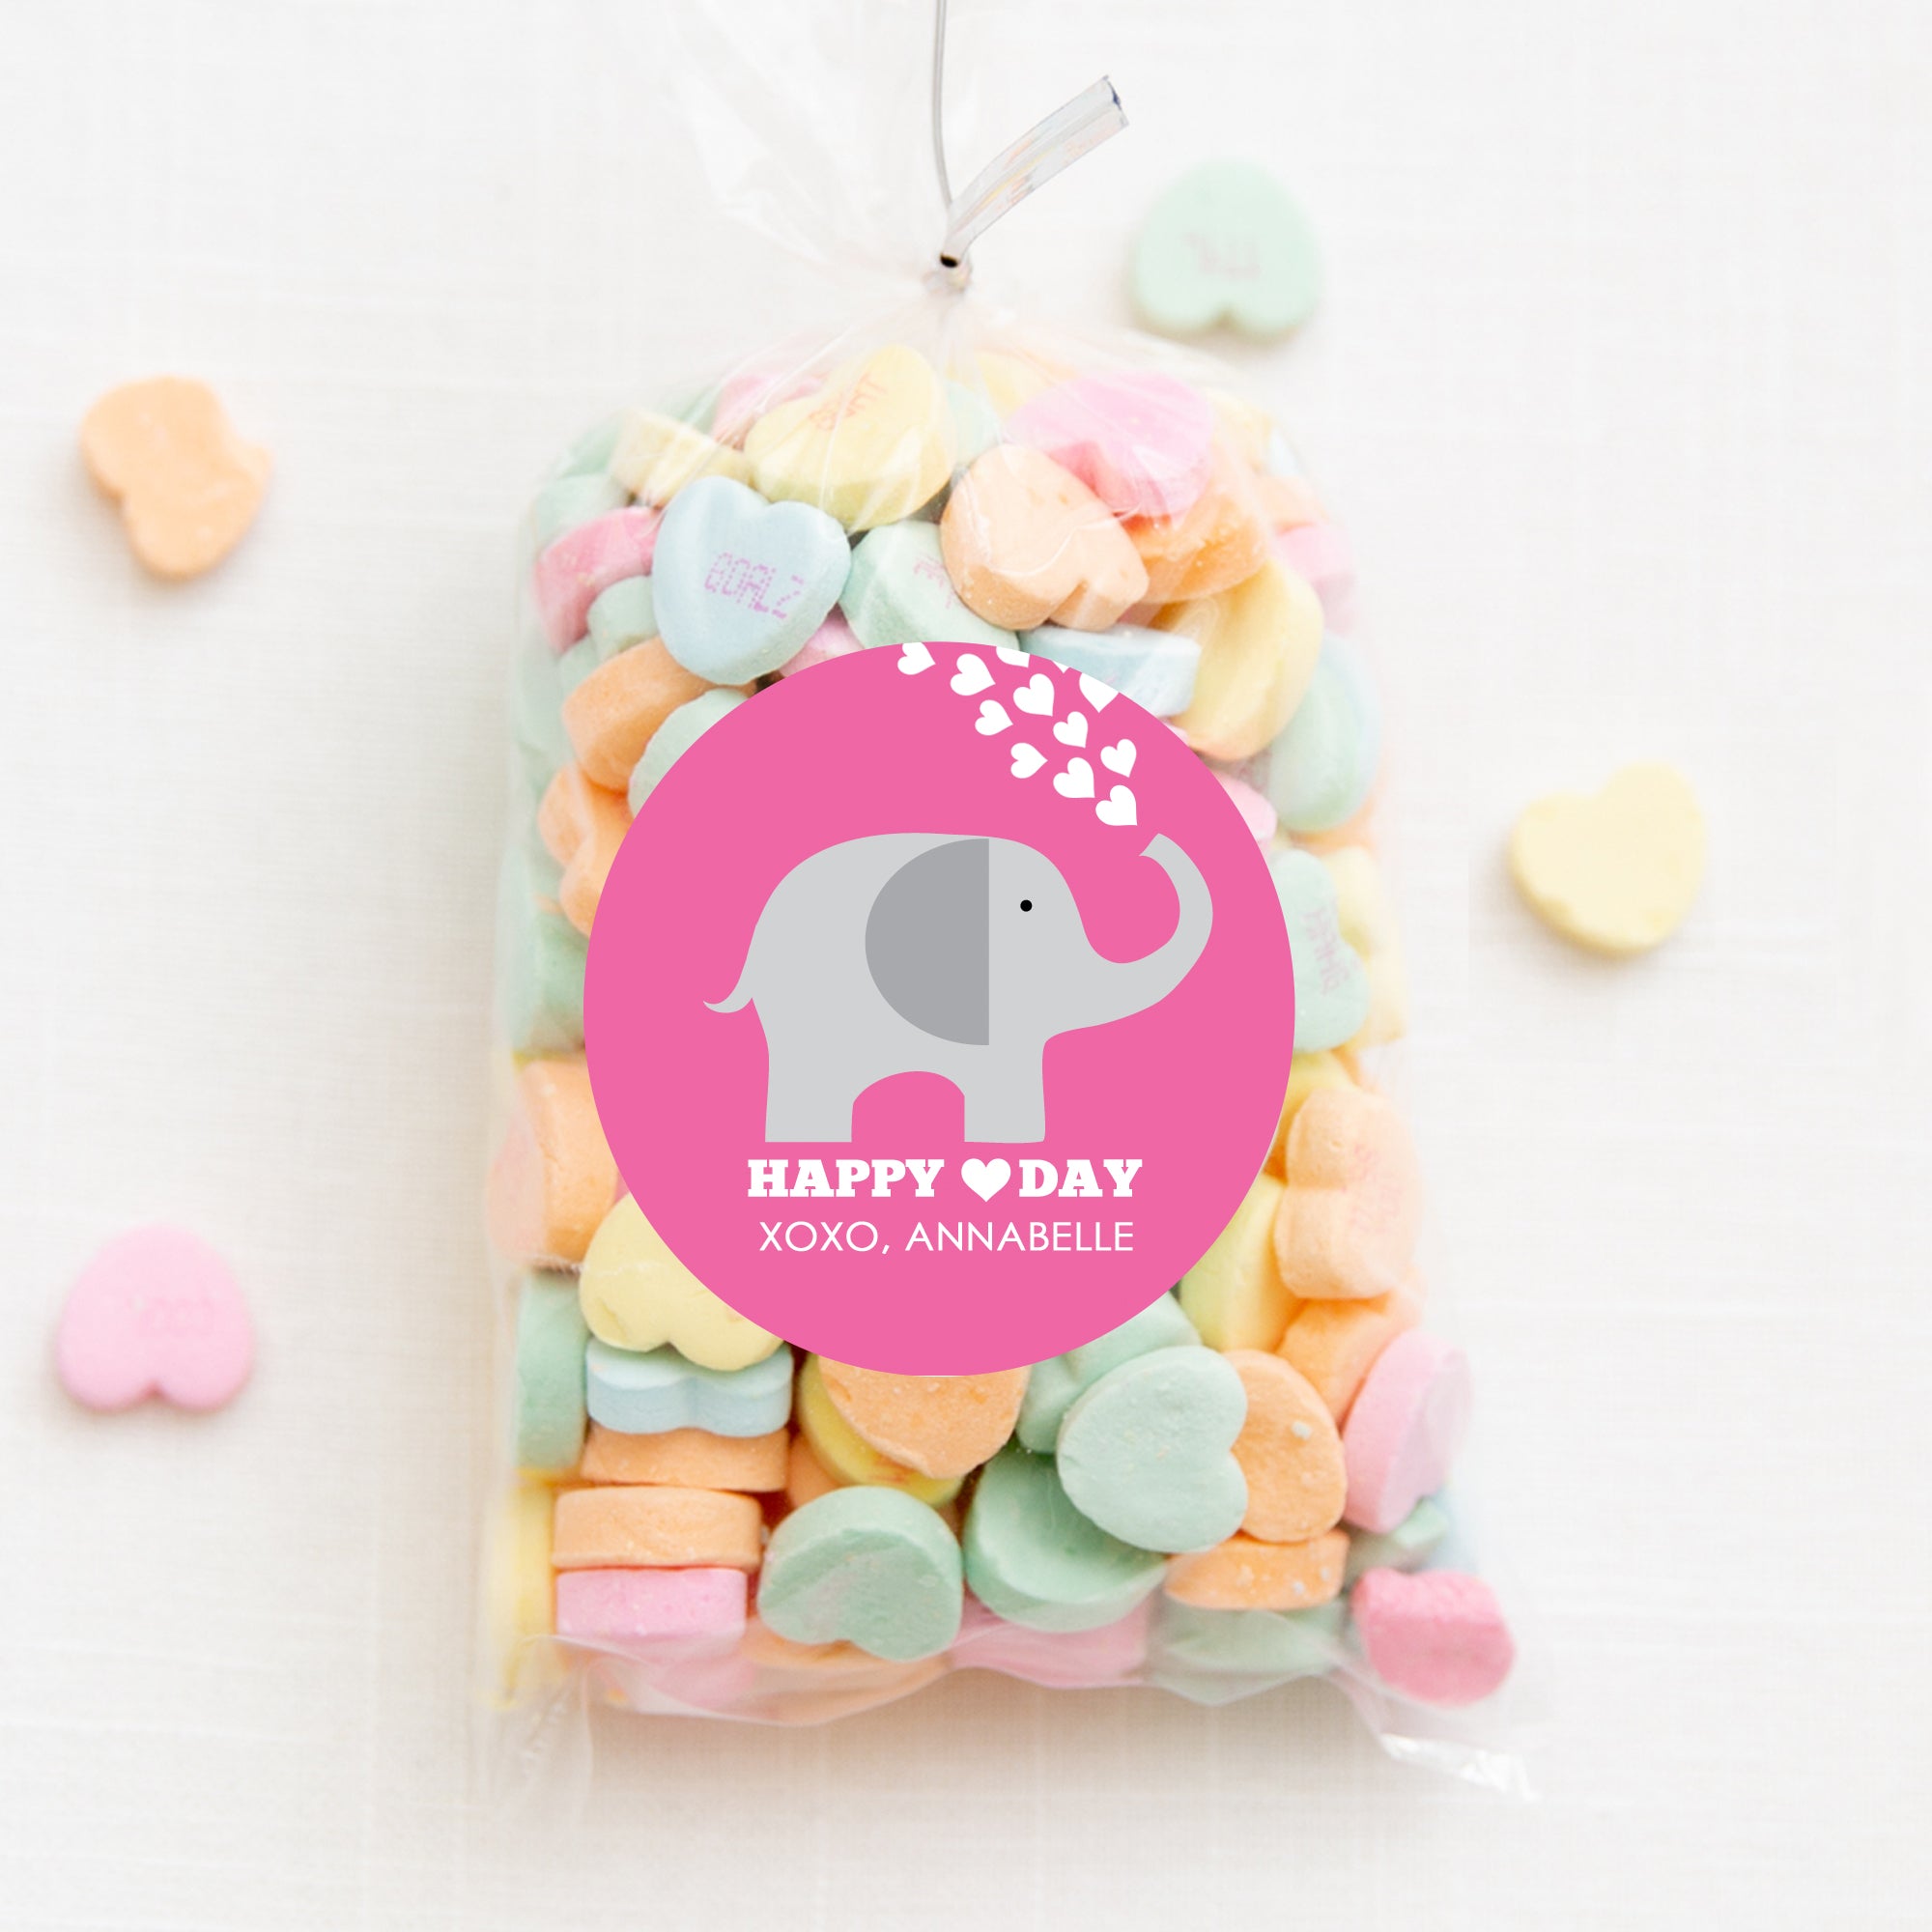 Elephant Valentine's Day Stickers, Pink with Hearts | 2.5" Round Valentine's Day Sticker for candy bag | Classroom Party | Personalized stickers | PIPSY.COM